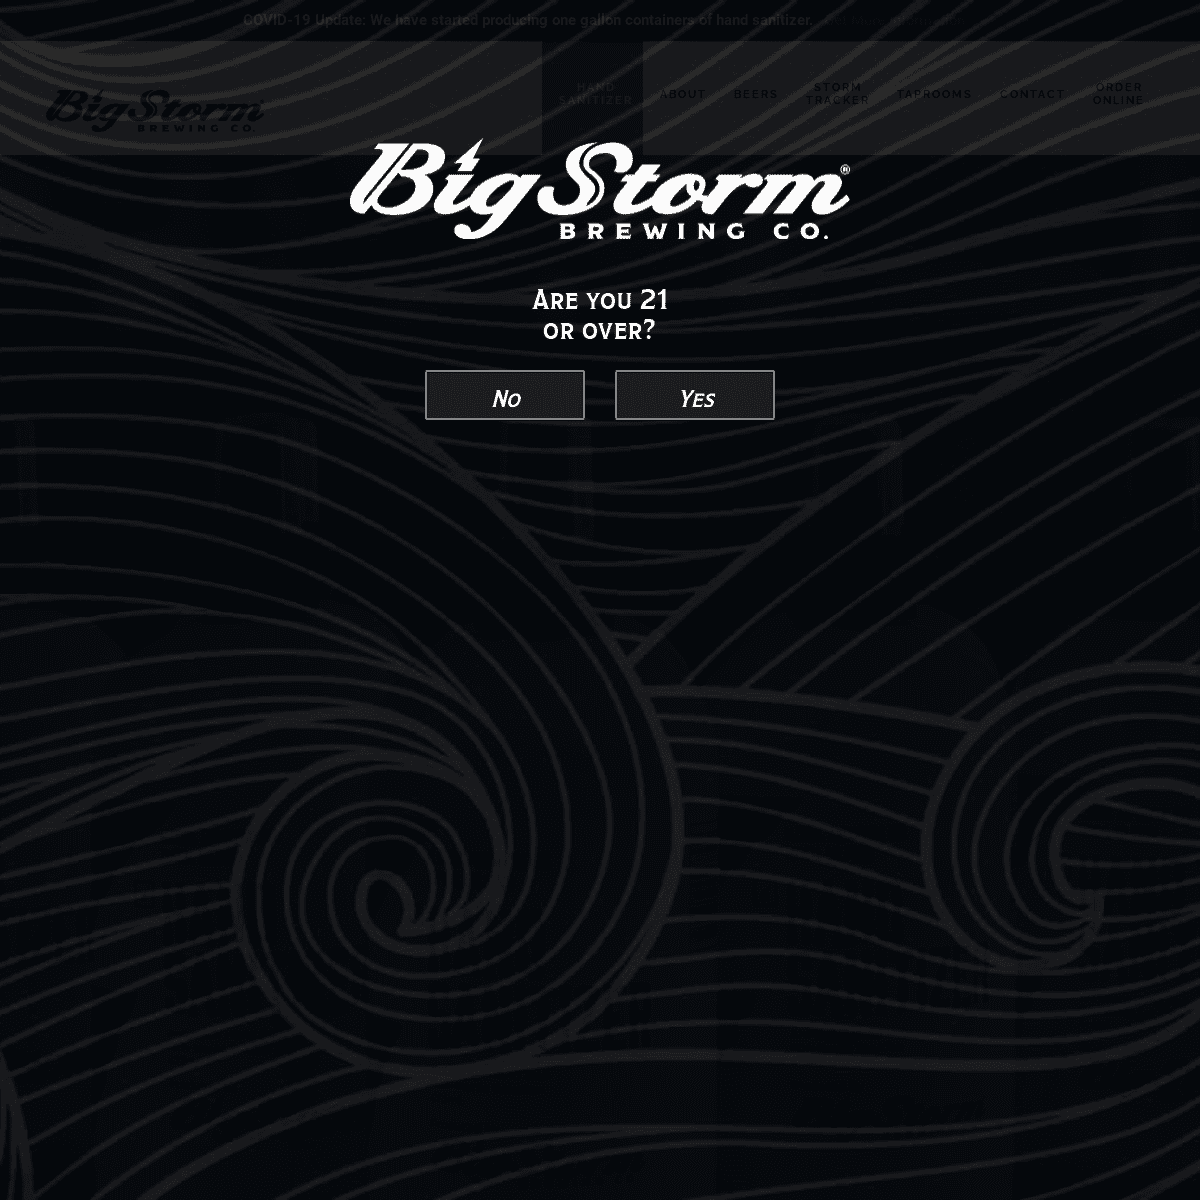 A complete backup of https://bigstormbrewery.com